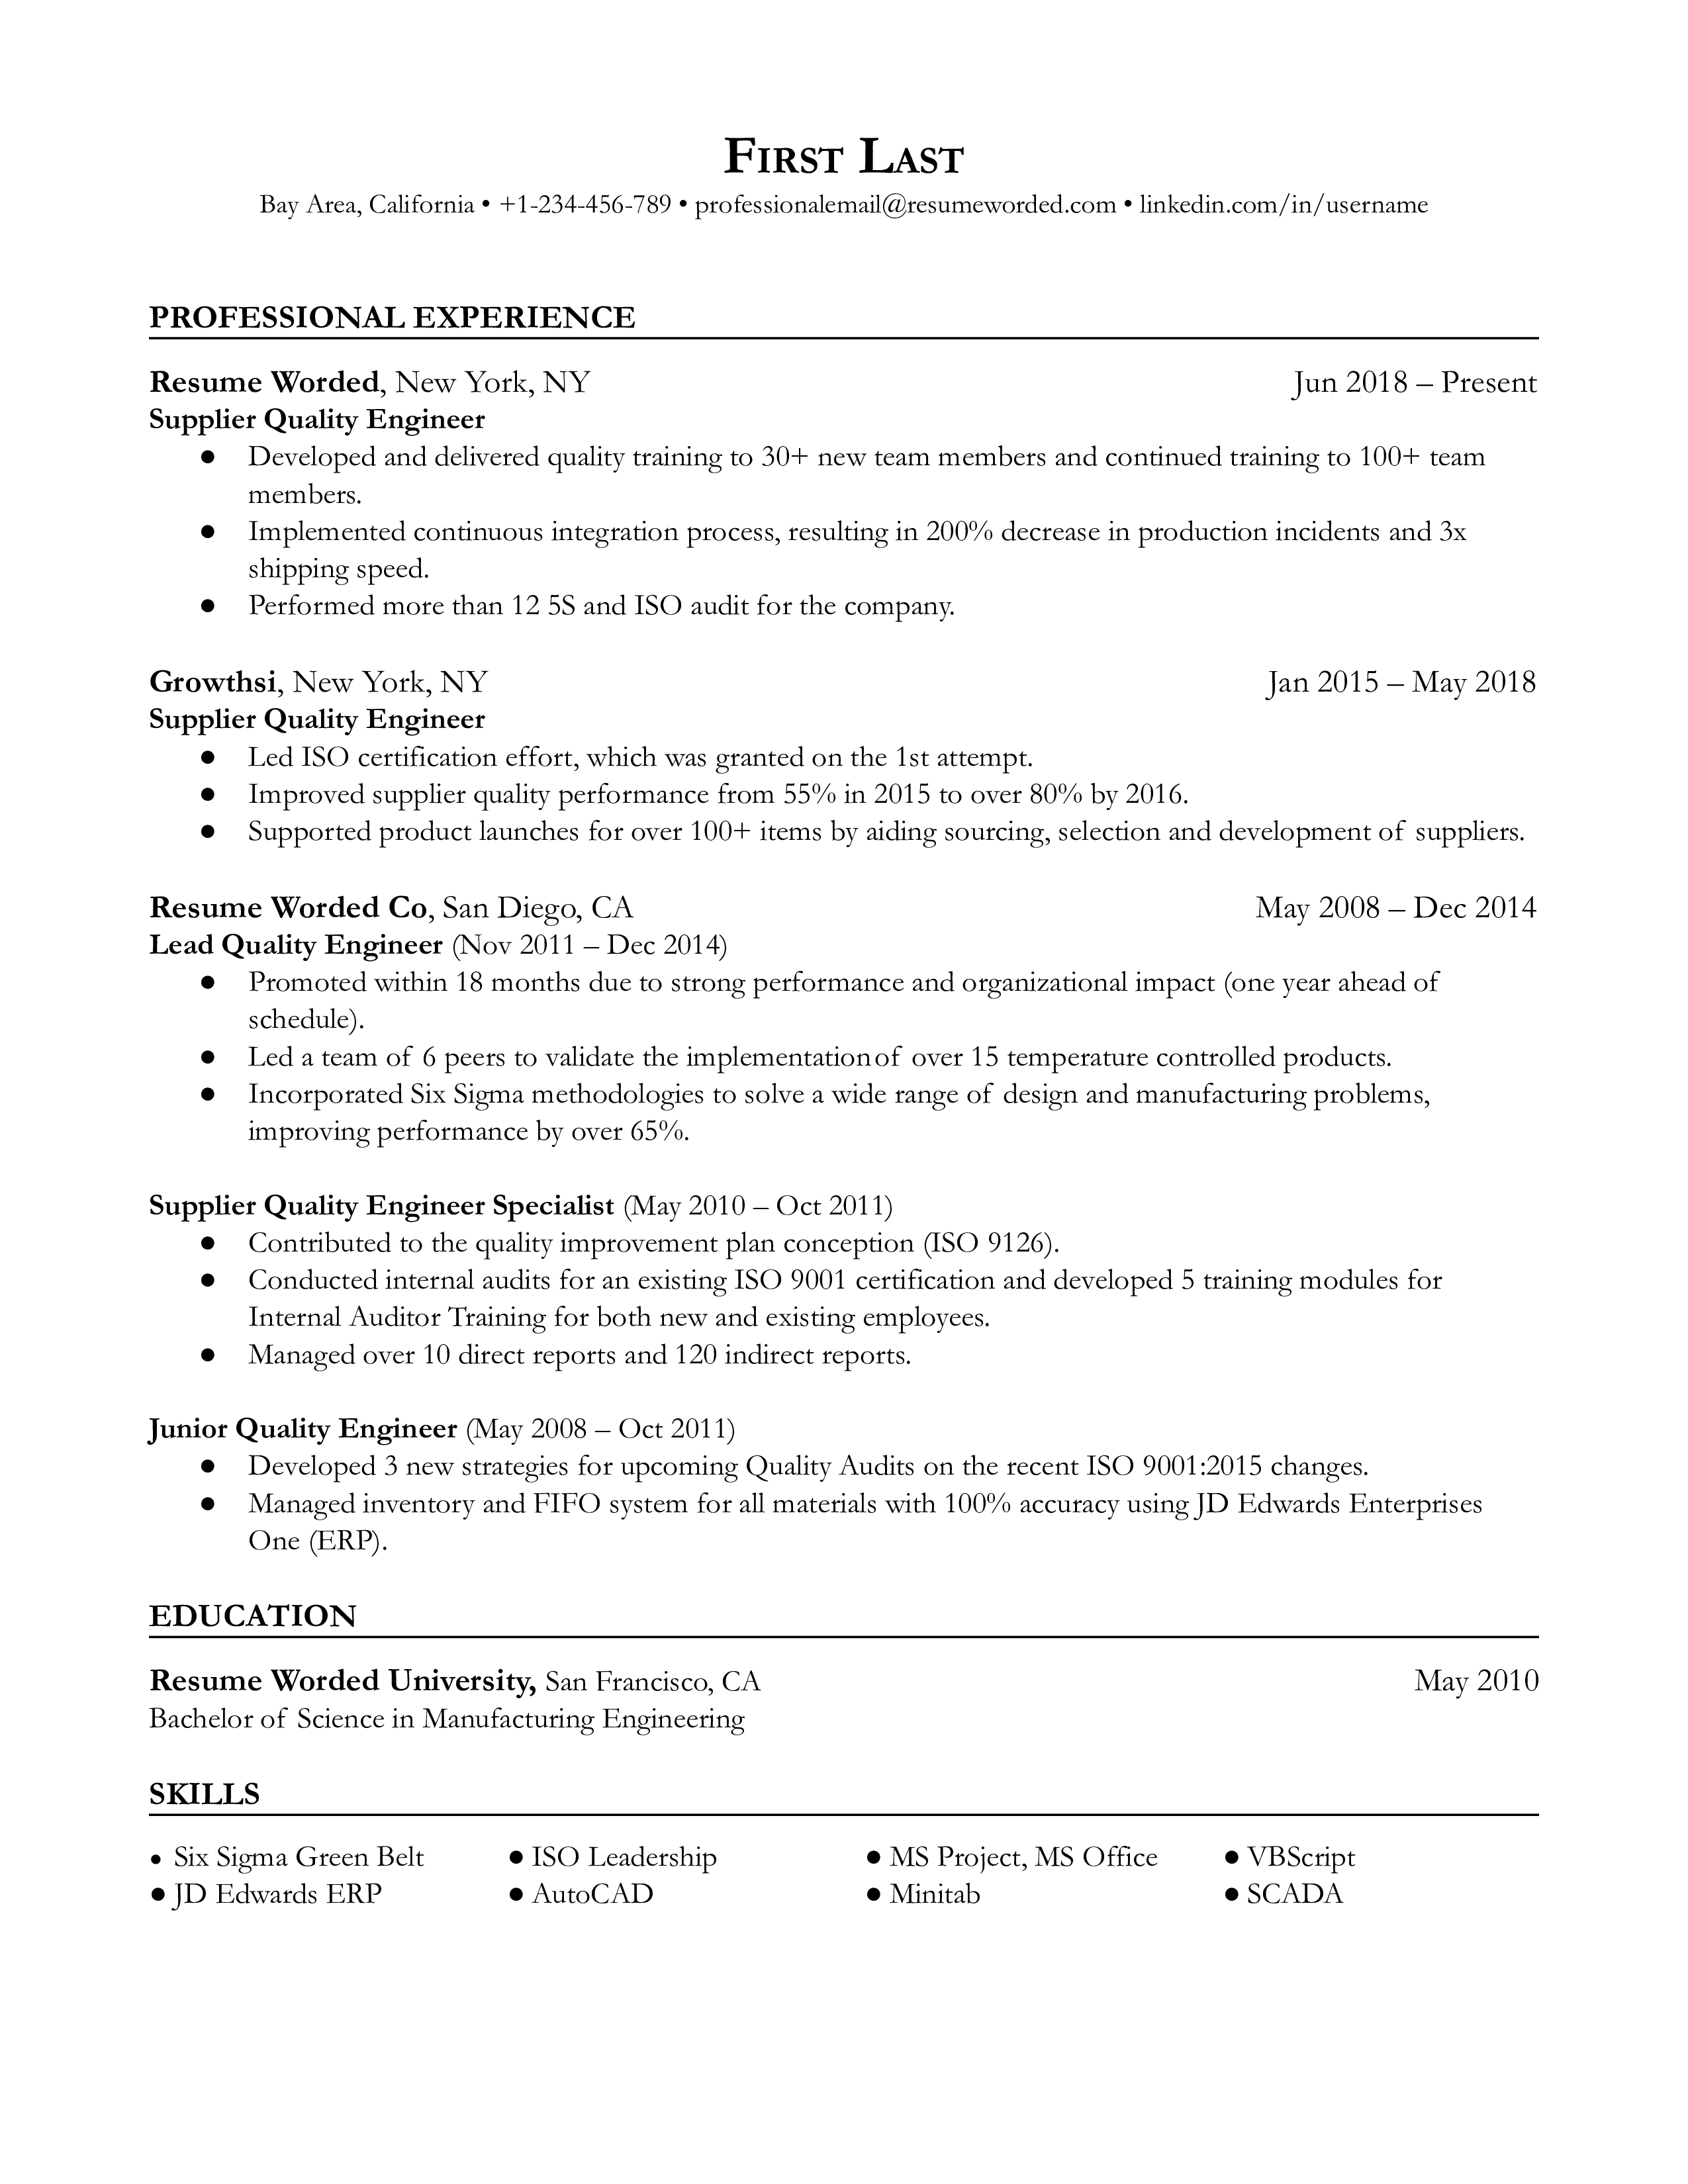 Supplier Quality Engineer Resume Template + Example